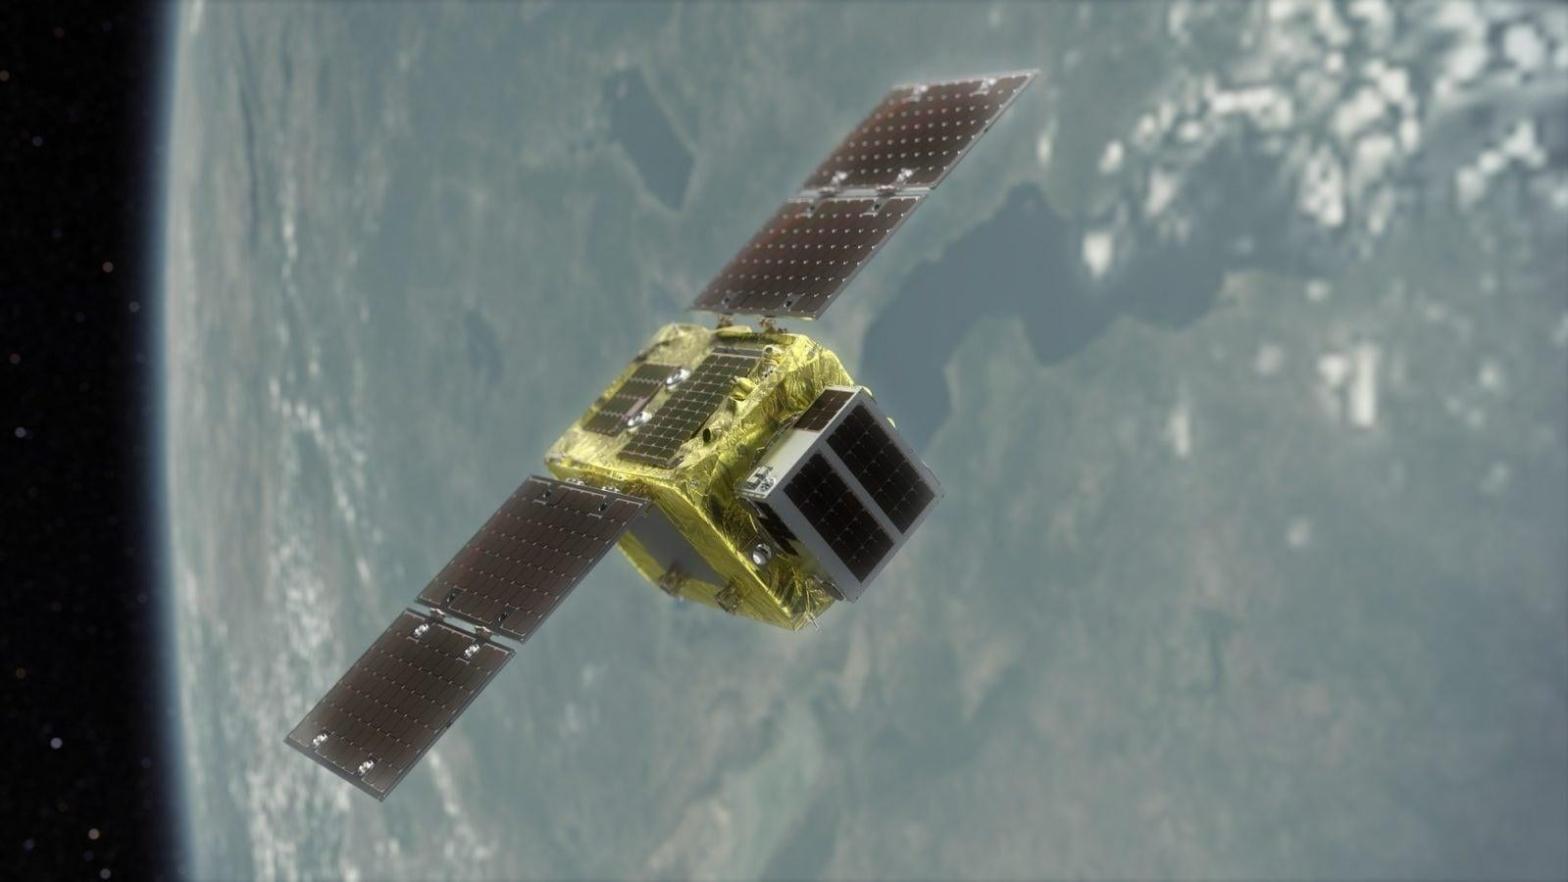 Astroscale will develop ELSA-M a new version of their previous debris removal spacecraft ELSA-d, illustrated here. (Illustration: Astroscale)